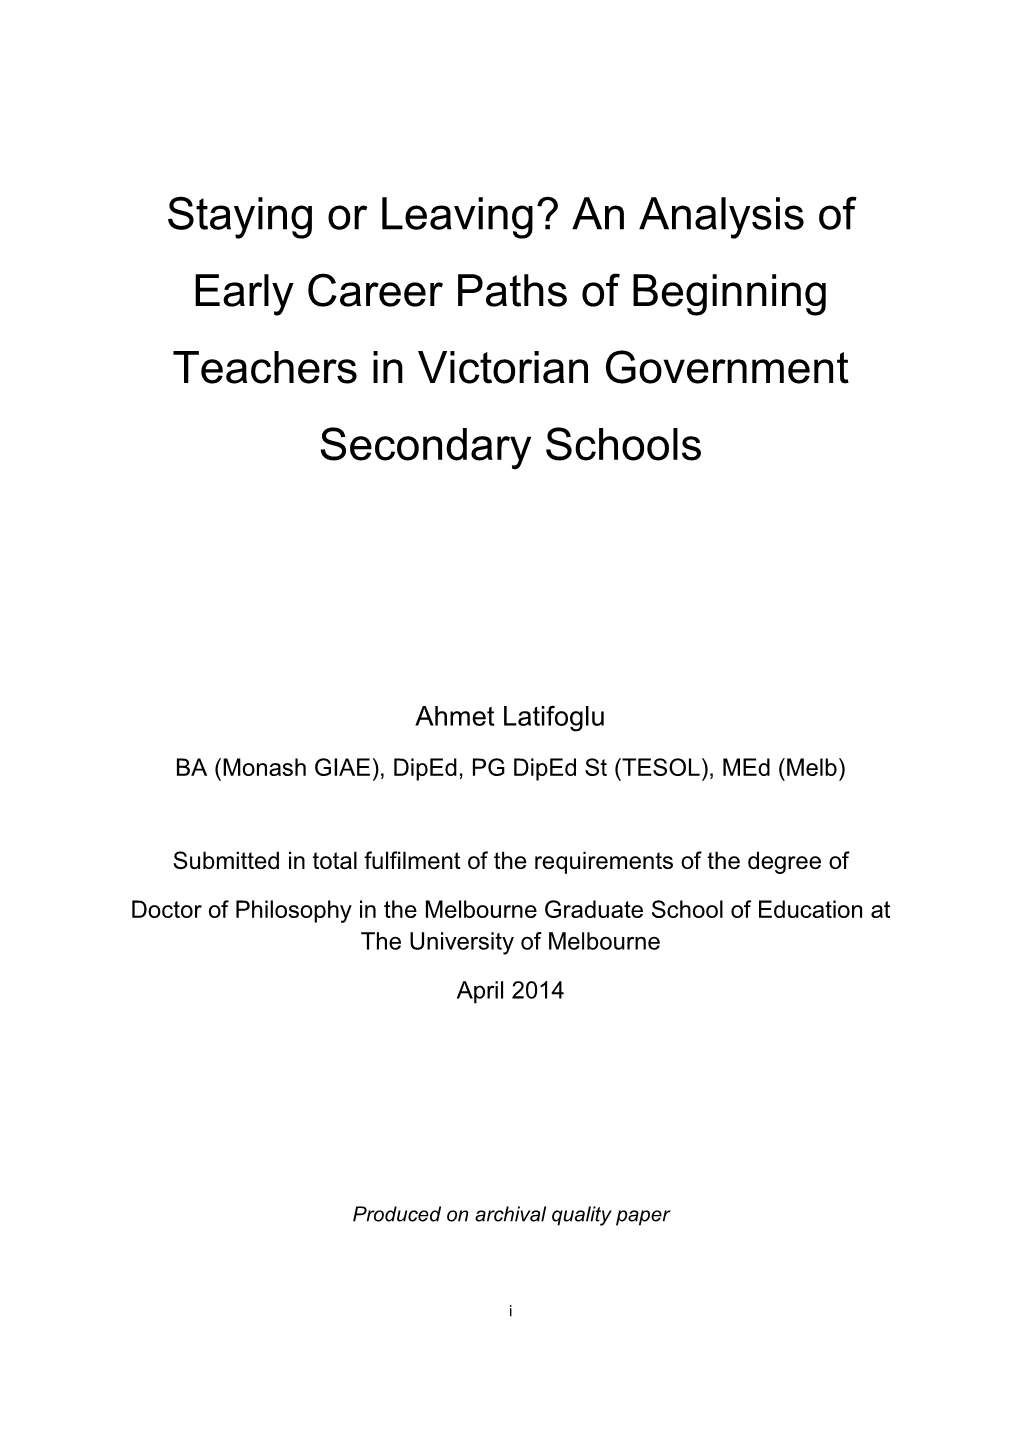 An Analysis of Early Career Paths of Beginning Teachers in Victorian Government Secondary Schools